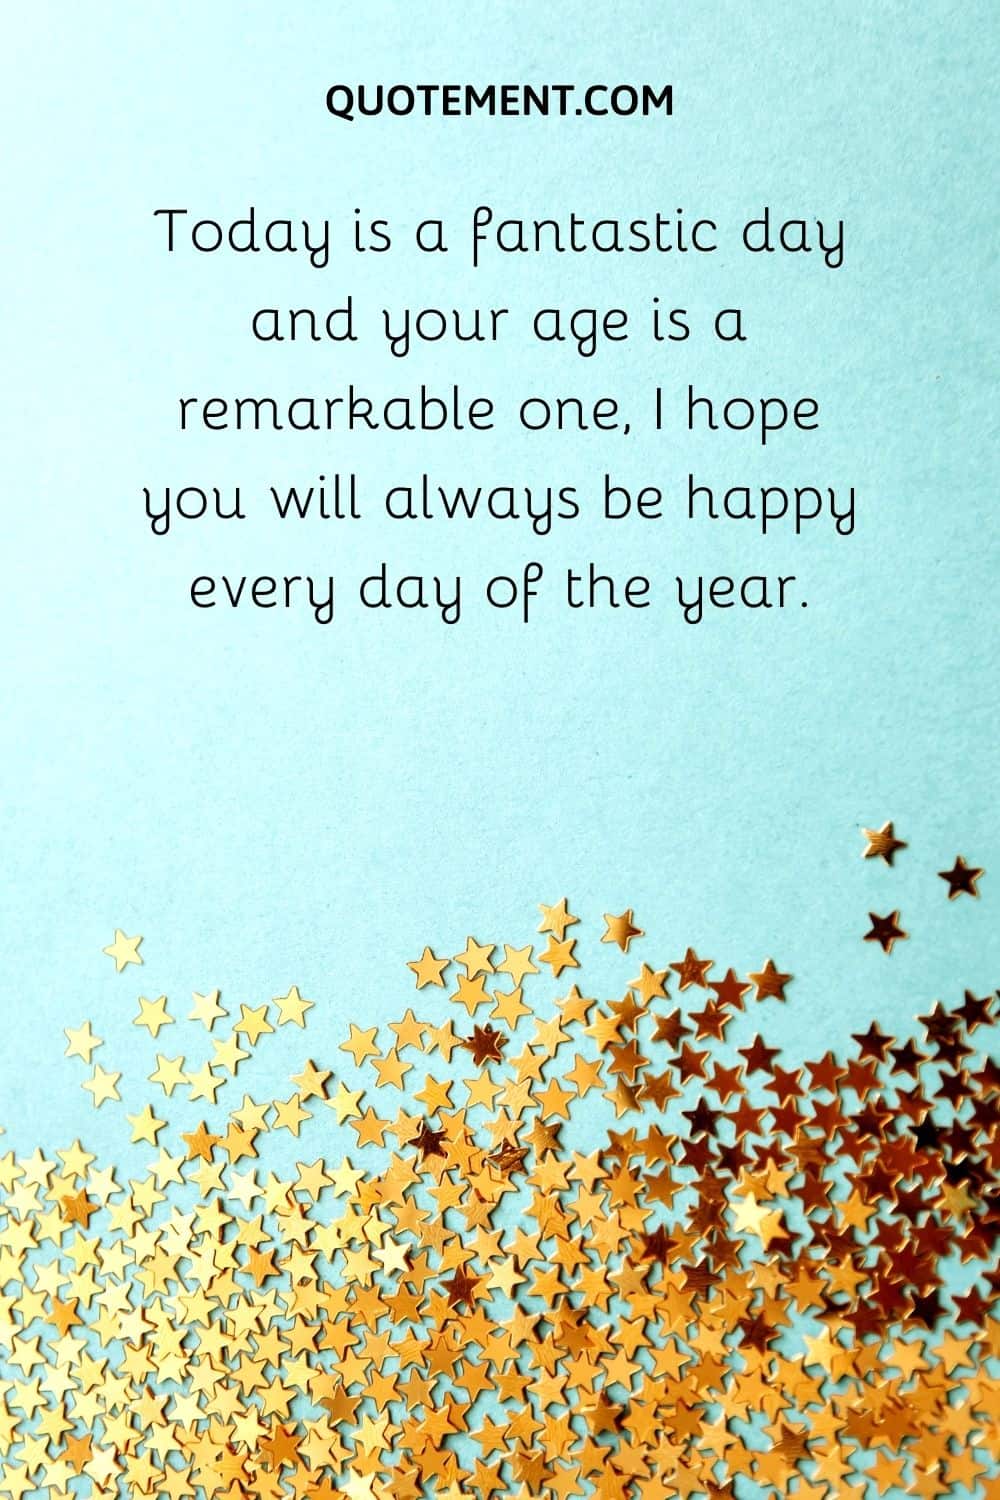 Today is a fantastic day and your age is a remarkable one, I hope you will always be happy every day of the year.